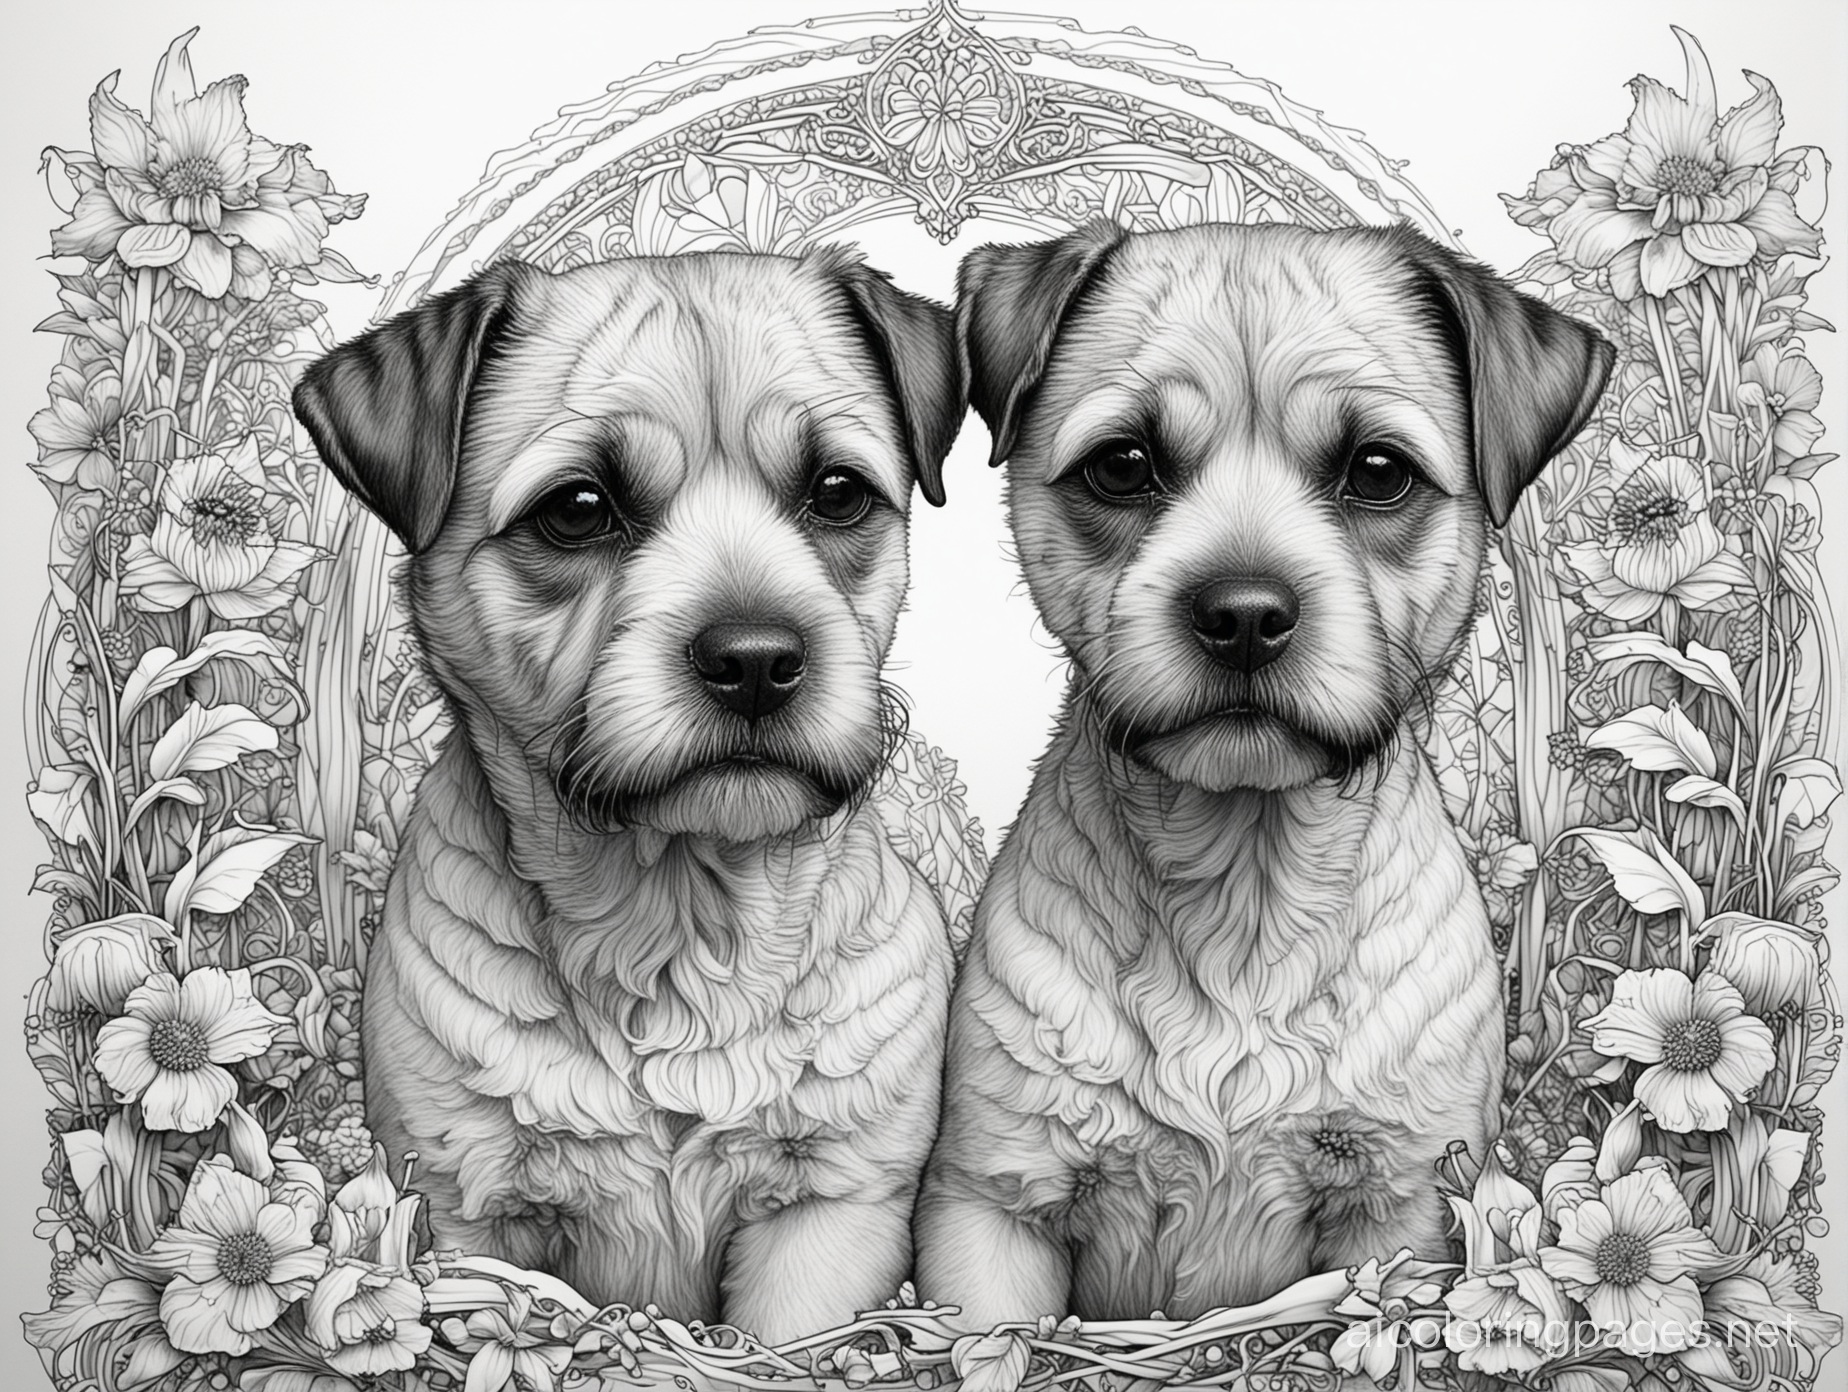 Border Terrier dogs, fantasy, ethereal, beautiful,  Art nouveau, in the style of Yossi Kotler, Coloring Page, black and white, line art, white background, Simplicity, Ample White Space. The background of the coloring page is plain white to make it easy for young children to color within the lines. The outlines of all the subjects are easy to distinguish, making it simple for kids to color without too much difficulty